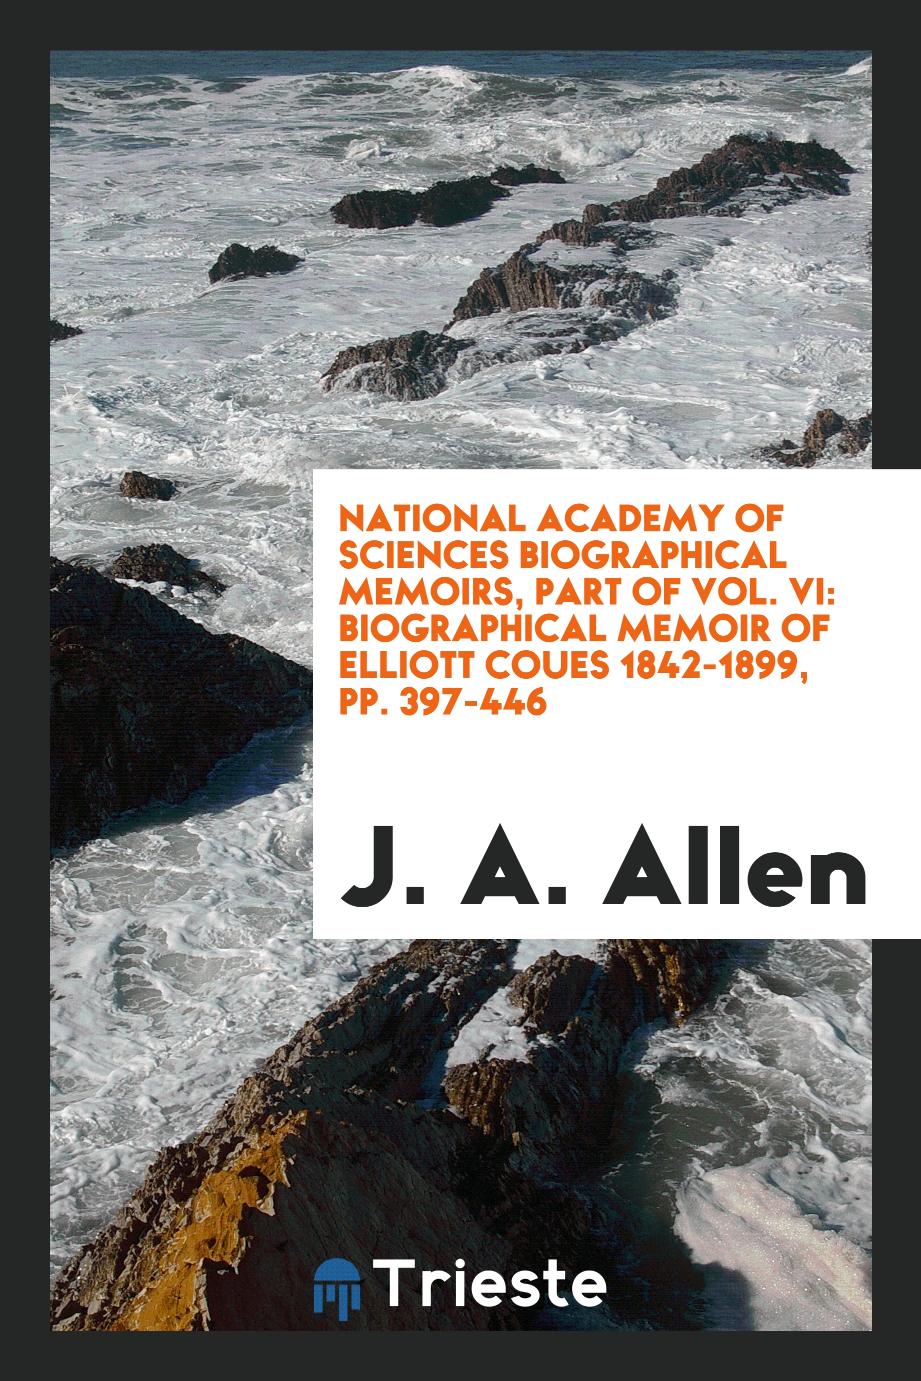 National academy of sciences biographical memoirs, part of Vol. VI: Biographical Memoir of Elliott Coues 1842-1899, pp. 397-446